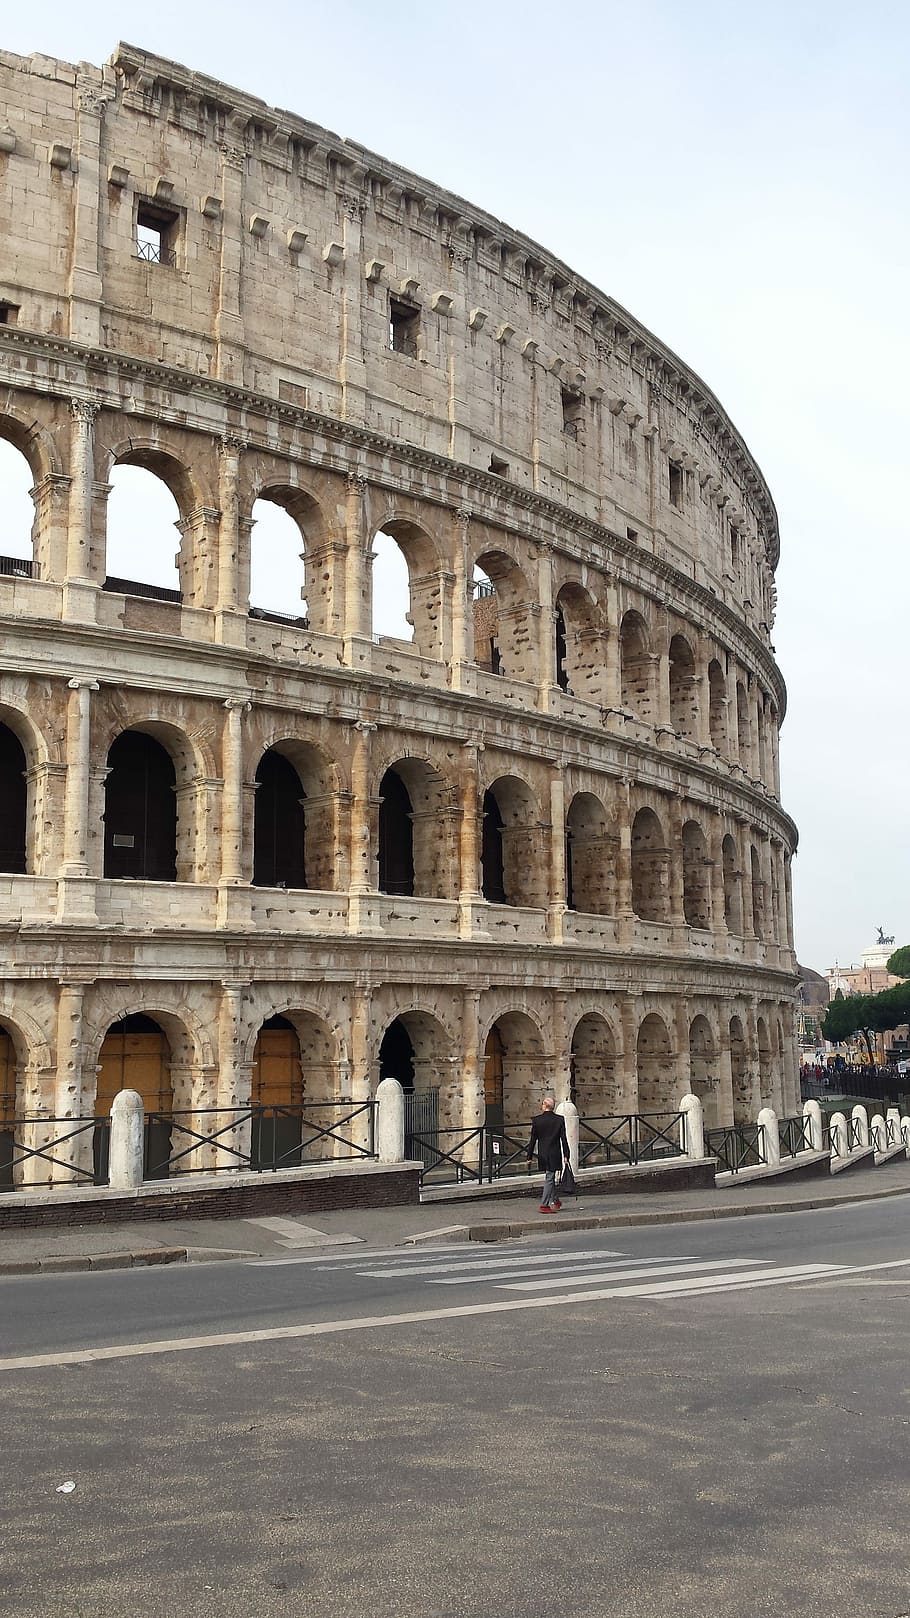 Colloseum, Rome, History, architecture, travel destinations, old ruin, ancient, arch, the past, built structure